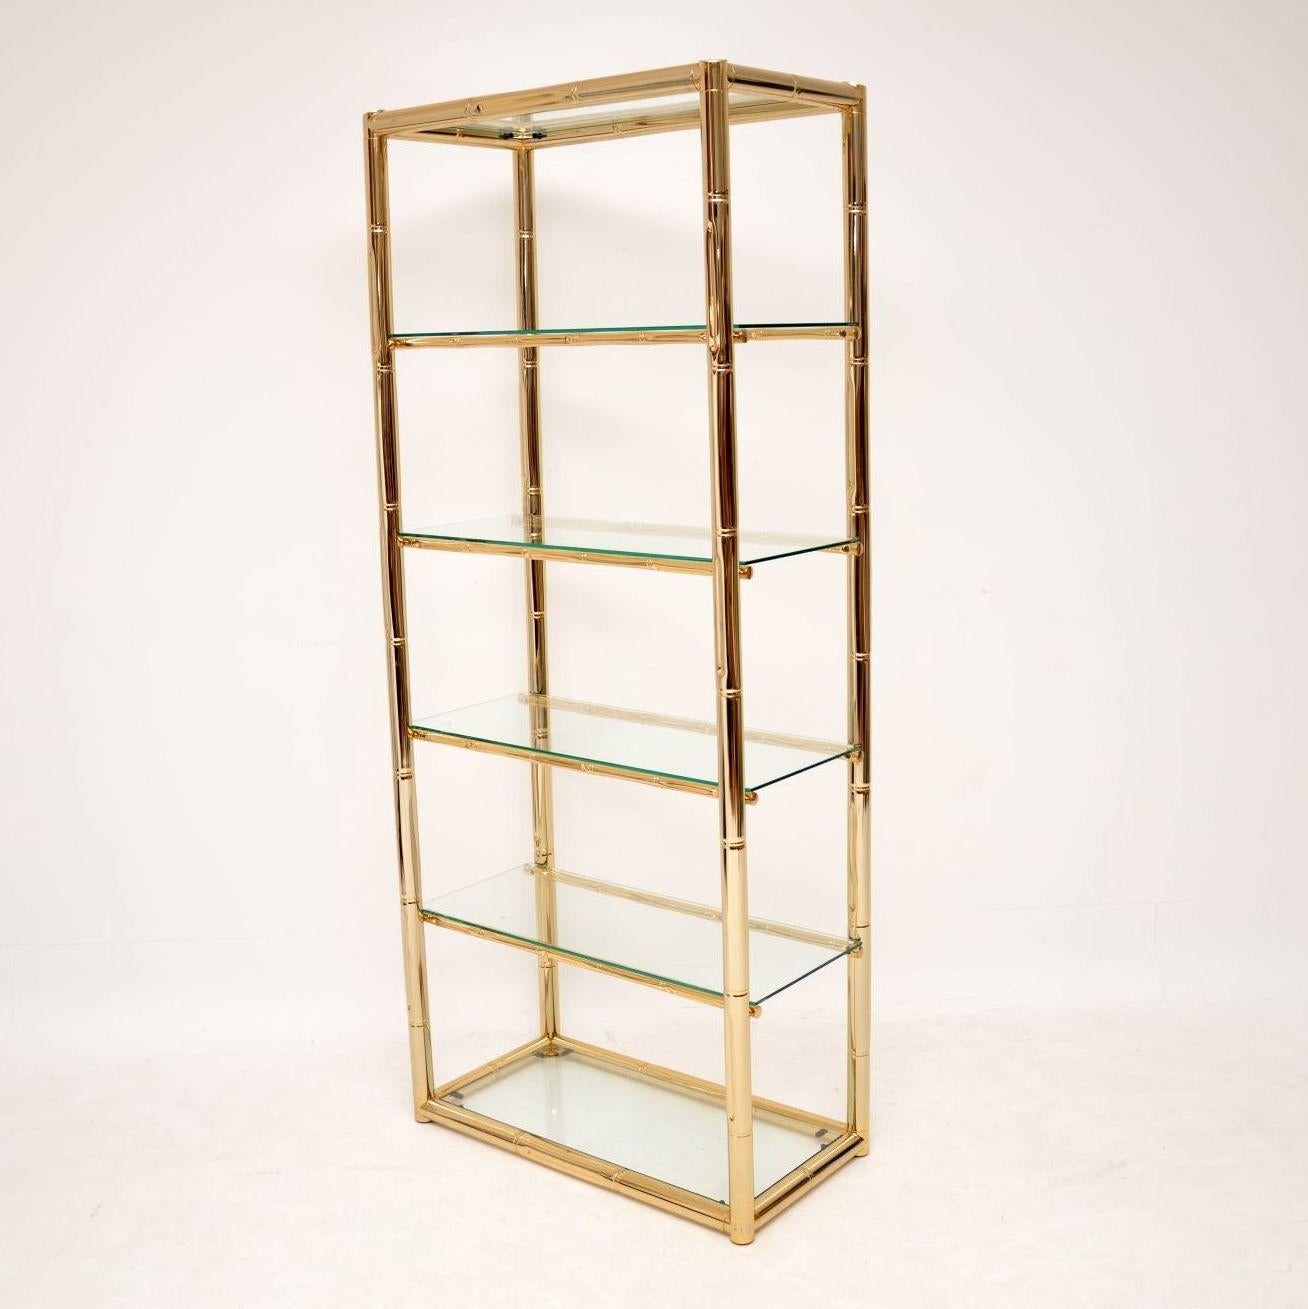 A stylish and very well made vintage brass cabinet with a faux bamboo design. This was made in Italy and dates from circa 1970s. The condition is great for its age, the brass frame is clean, sturdy and sound, with barely any wear to be seen. The